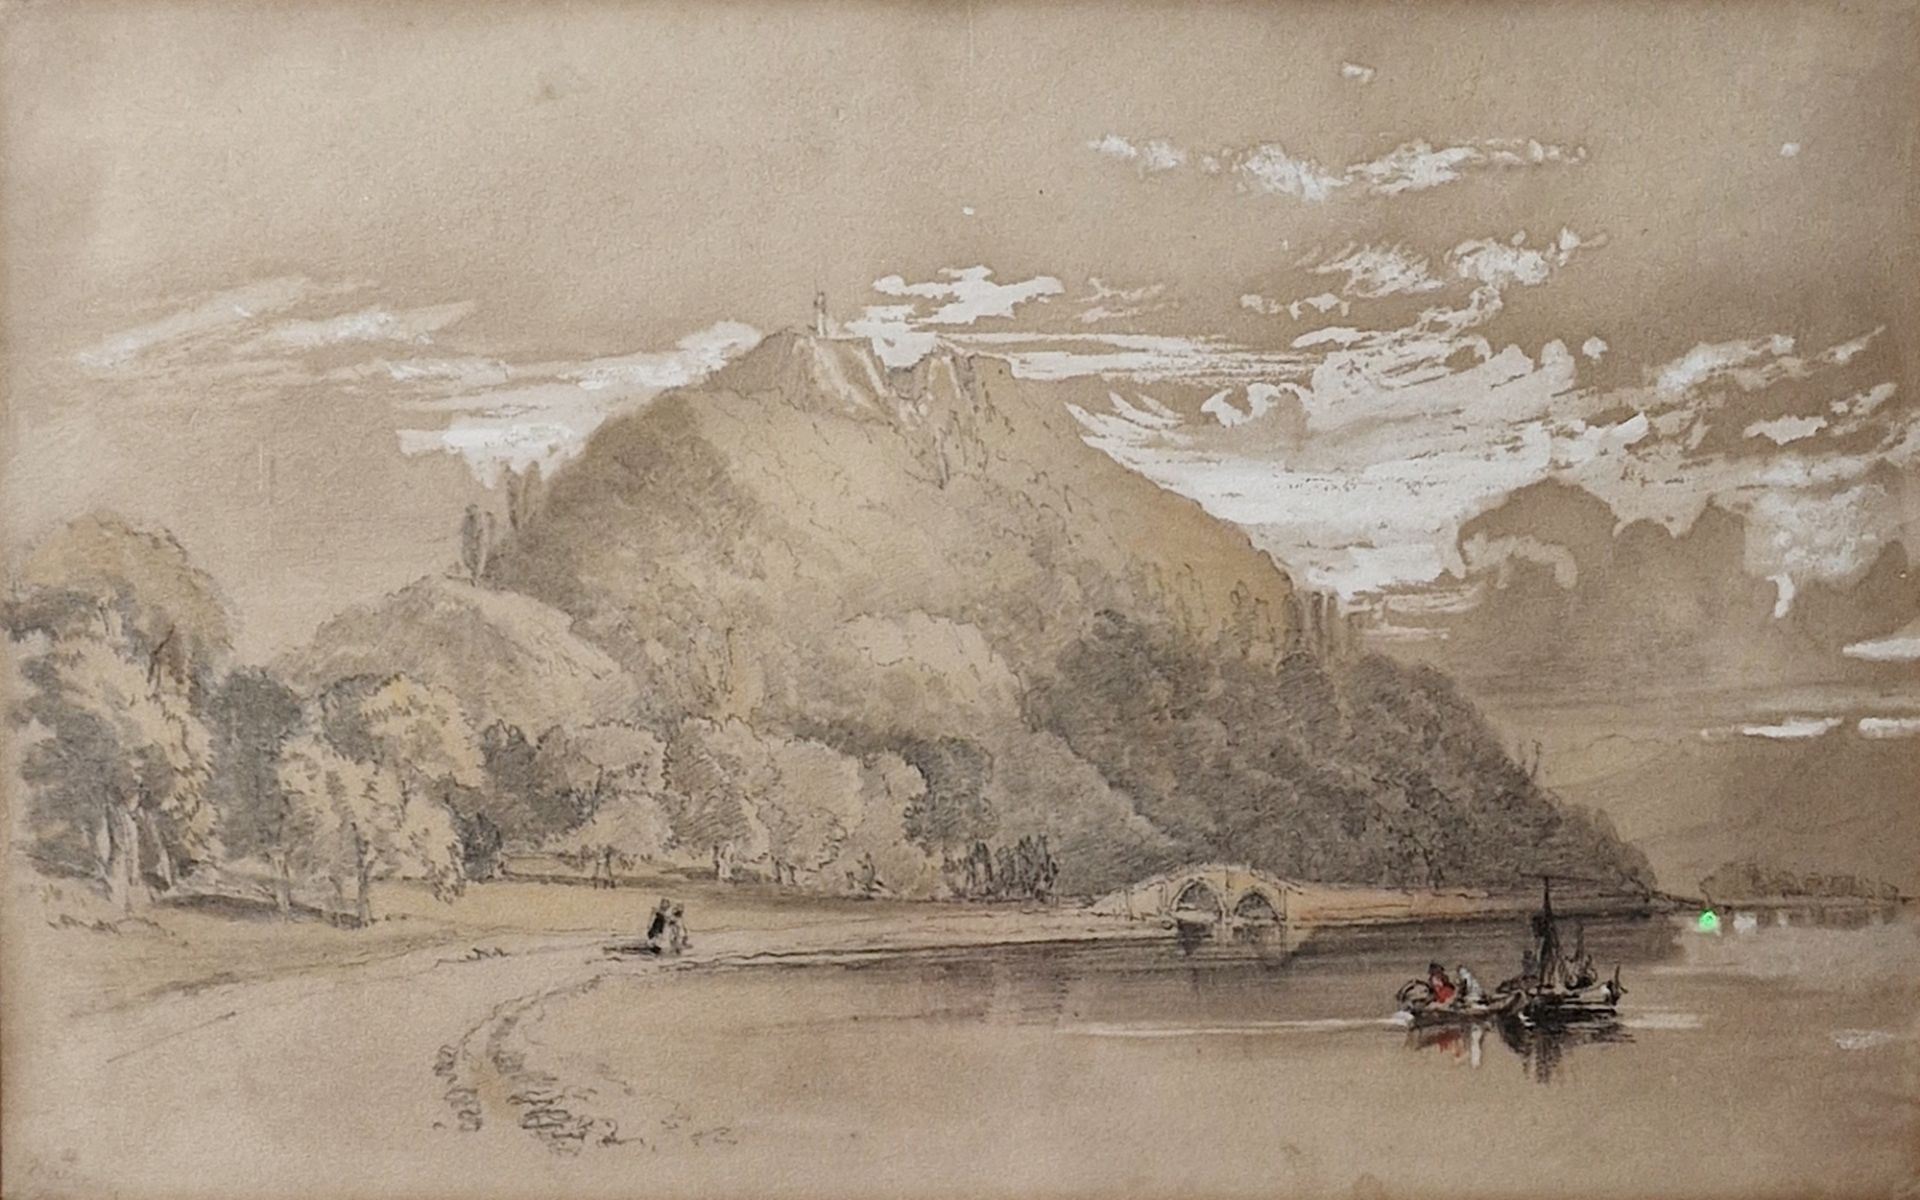 Attributed to George Clarkson Stanfield (1828-1878) Pencil and watercolour sketch heightened with